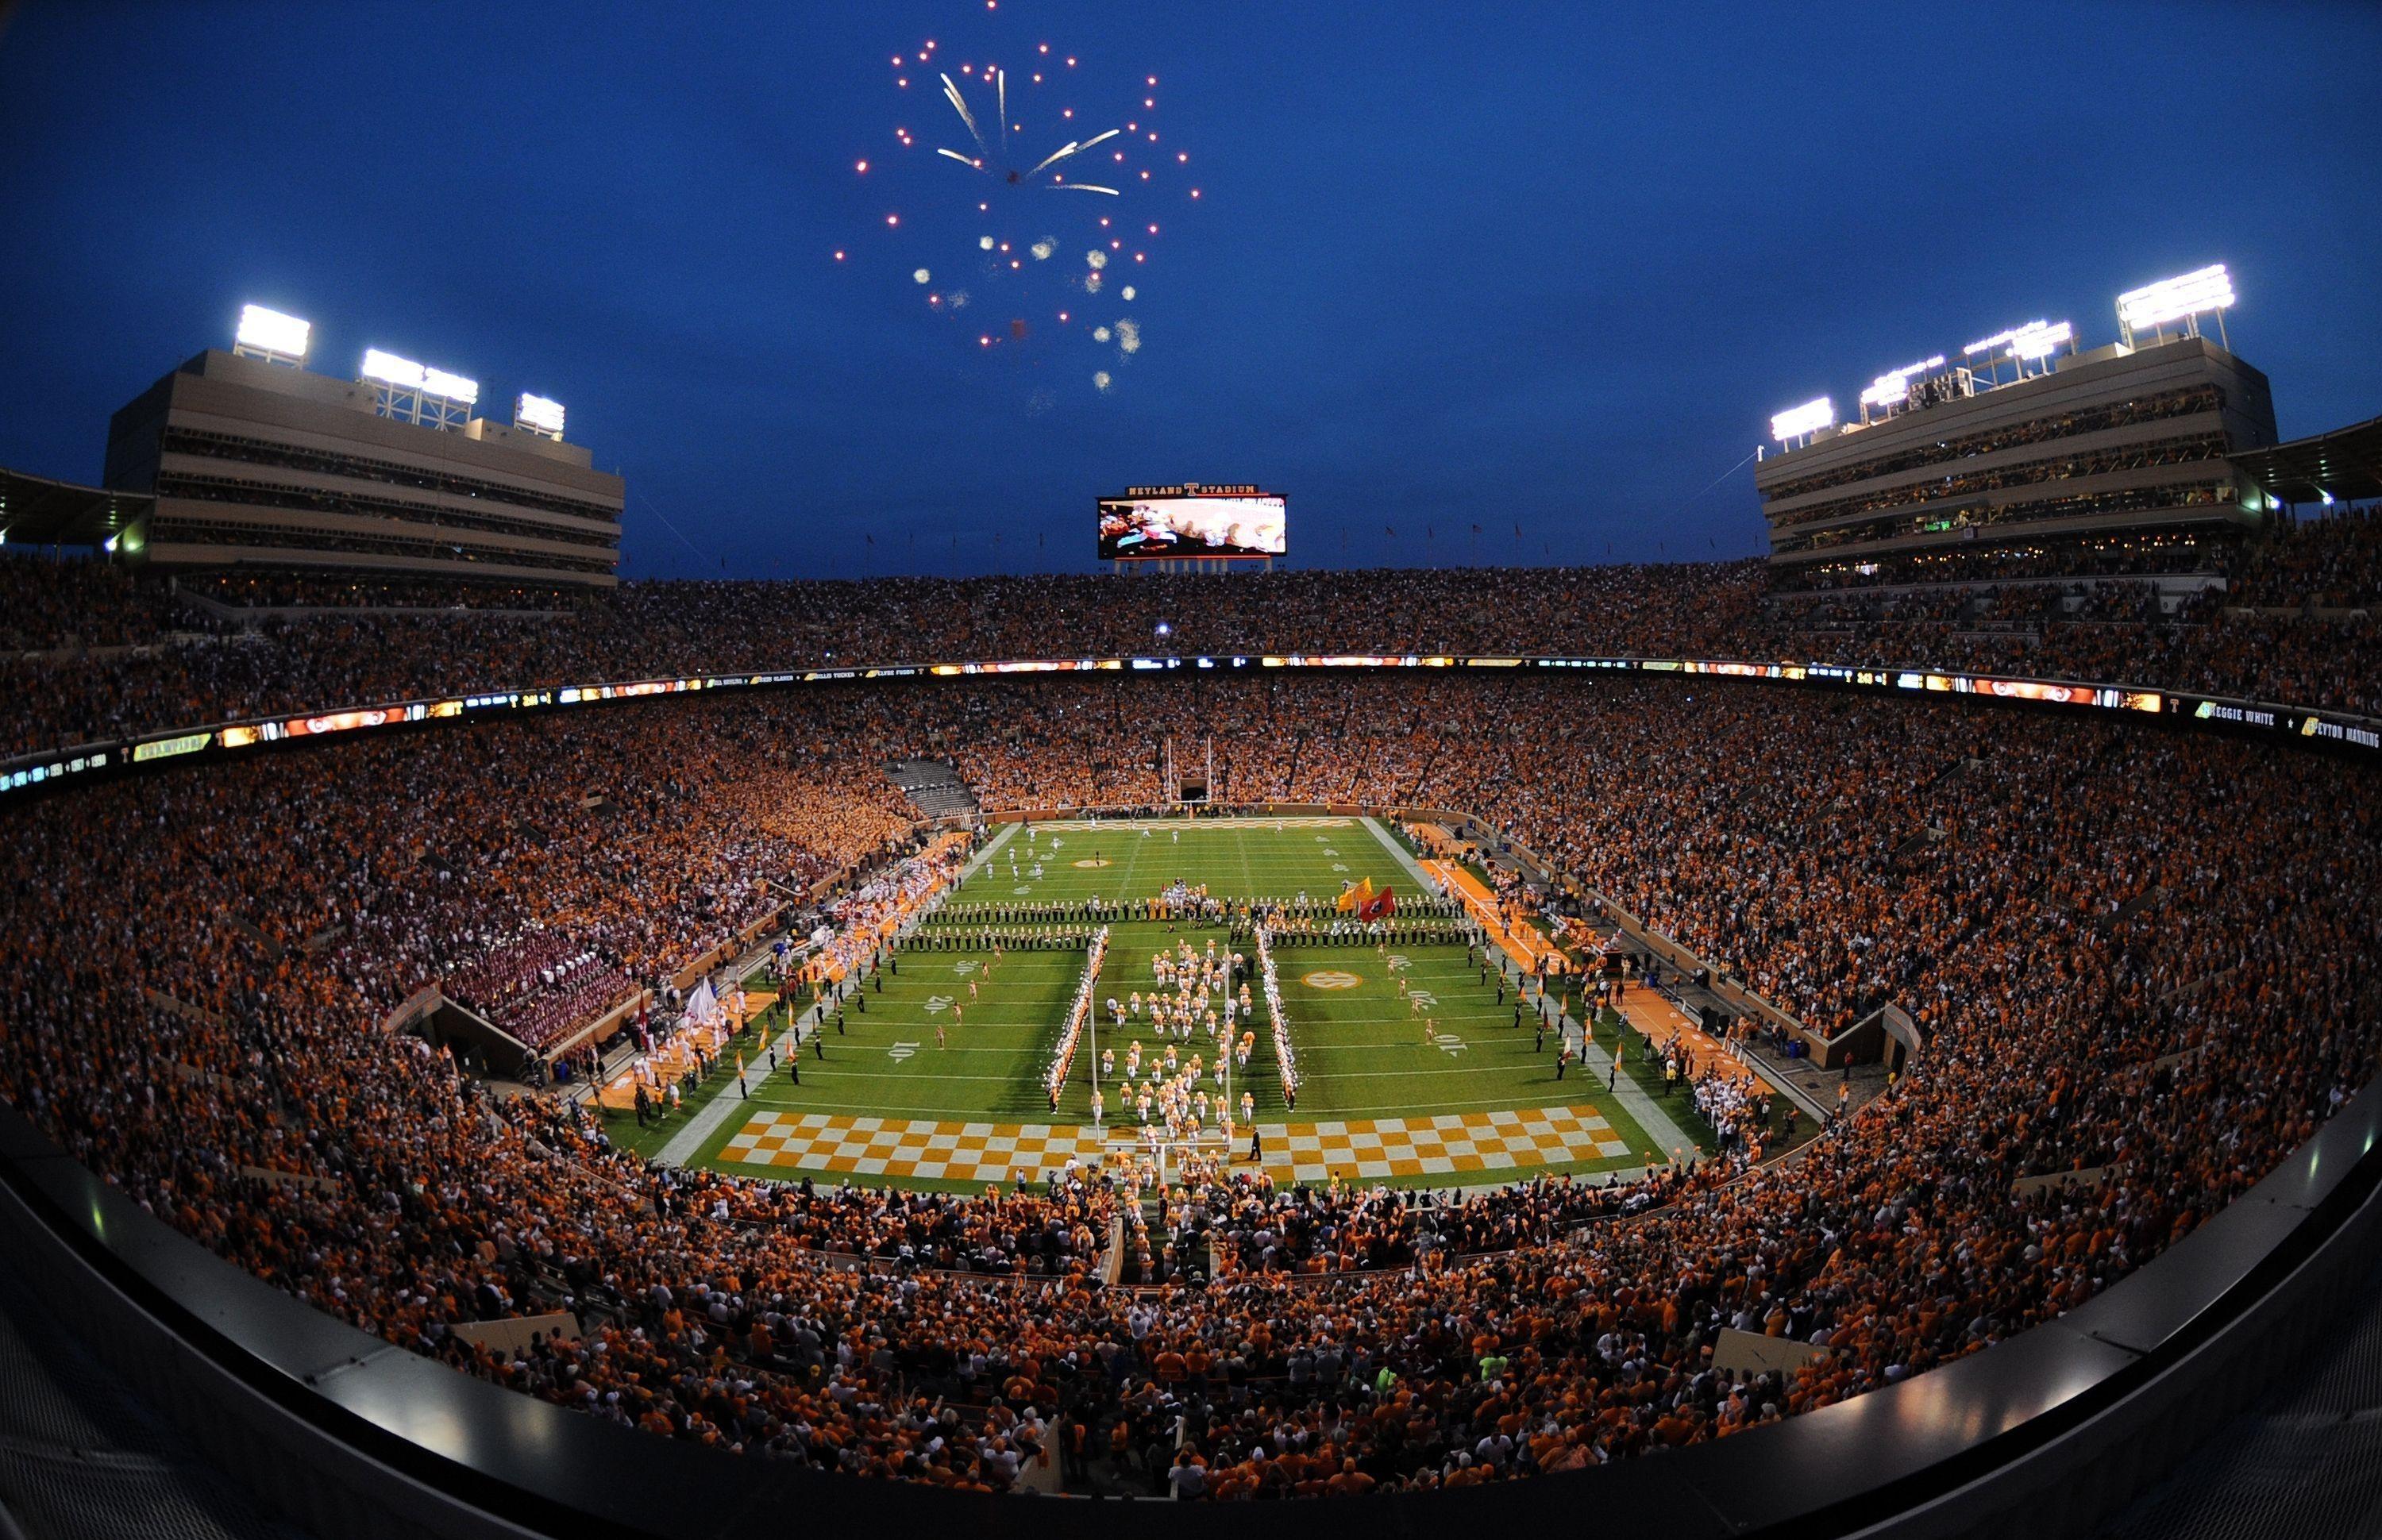 New Tennessee Vols Wallpaper For Android FULL HD 1080p For PC